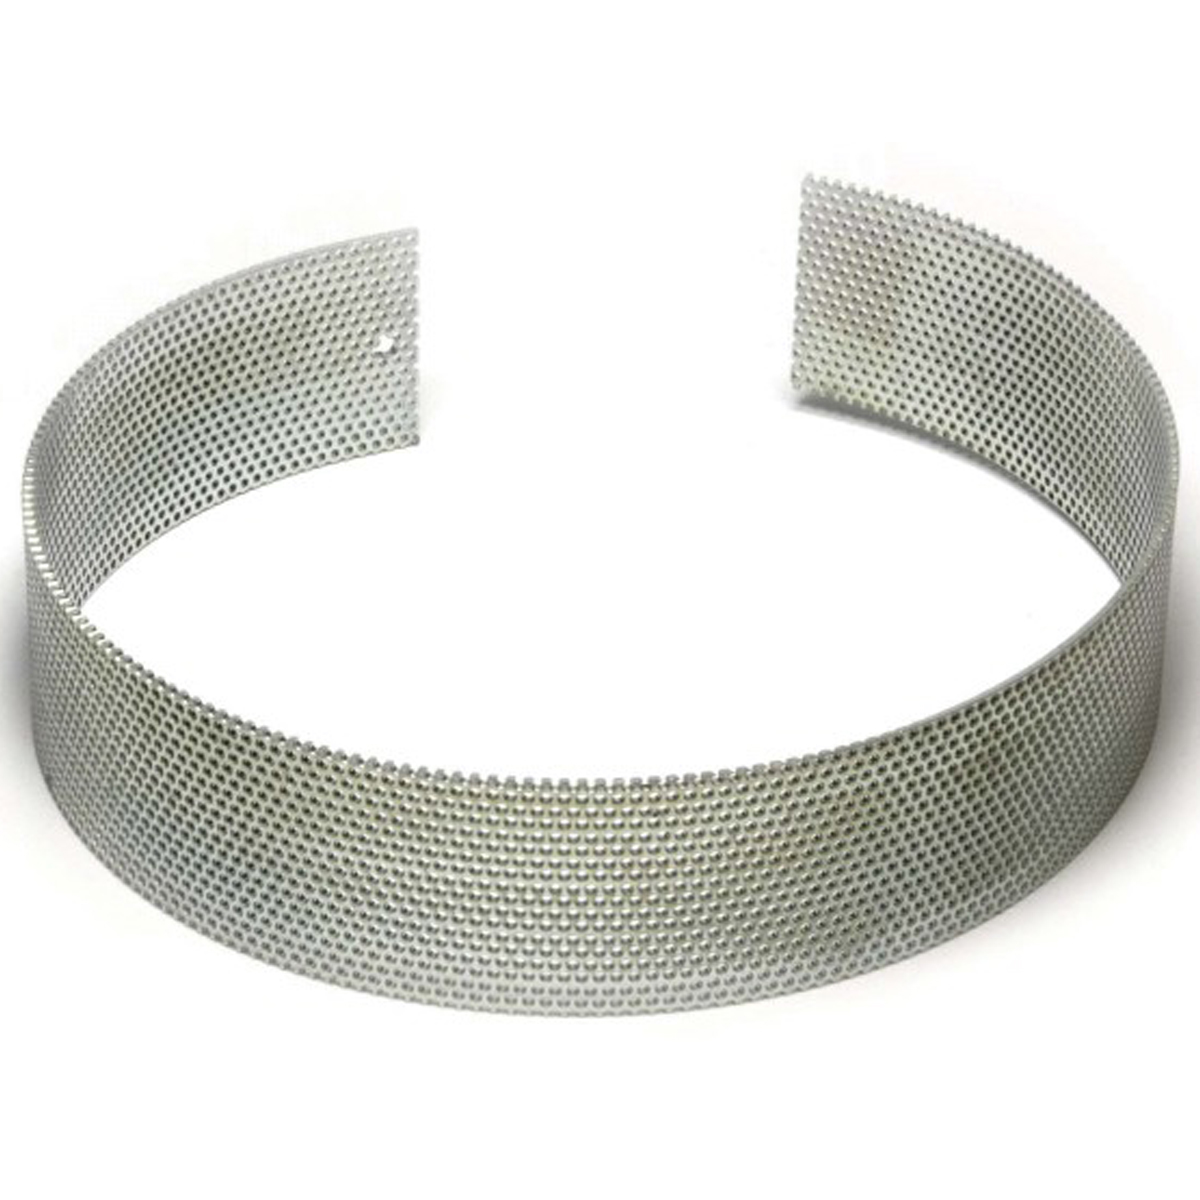 Replacement sieve 1.5 mm hole for flour mill 750 w